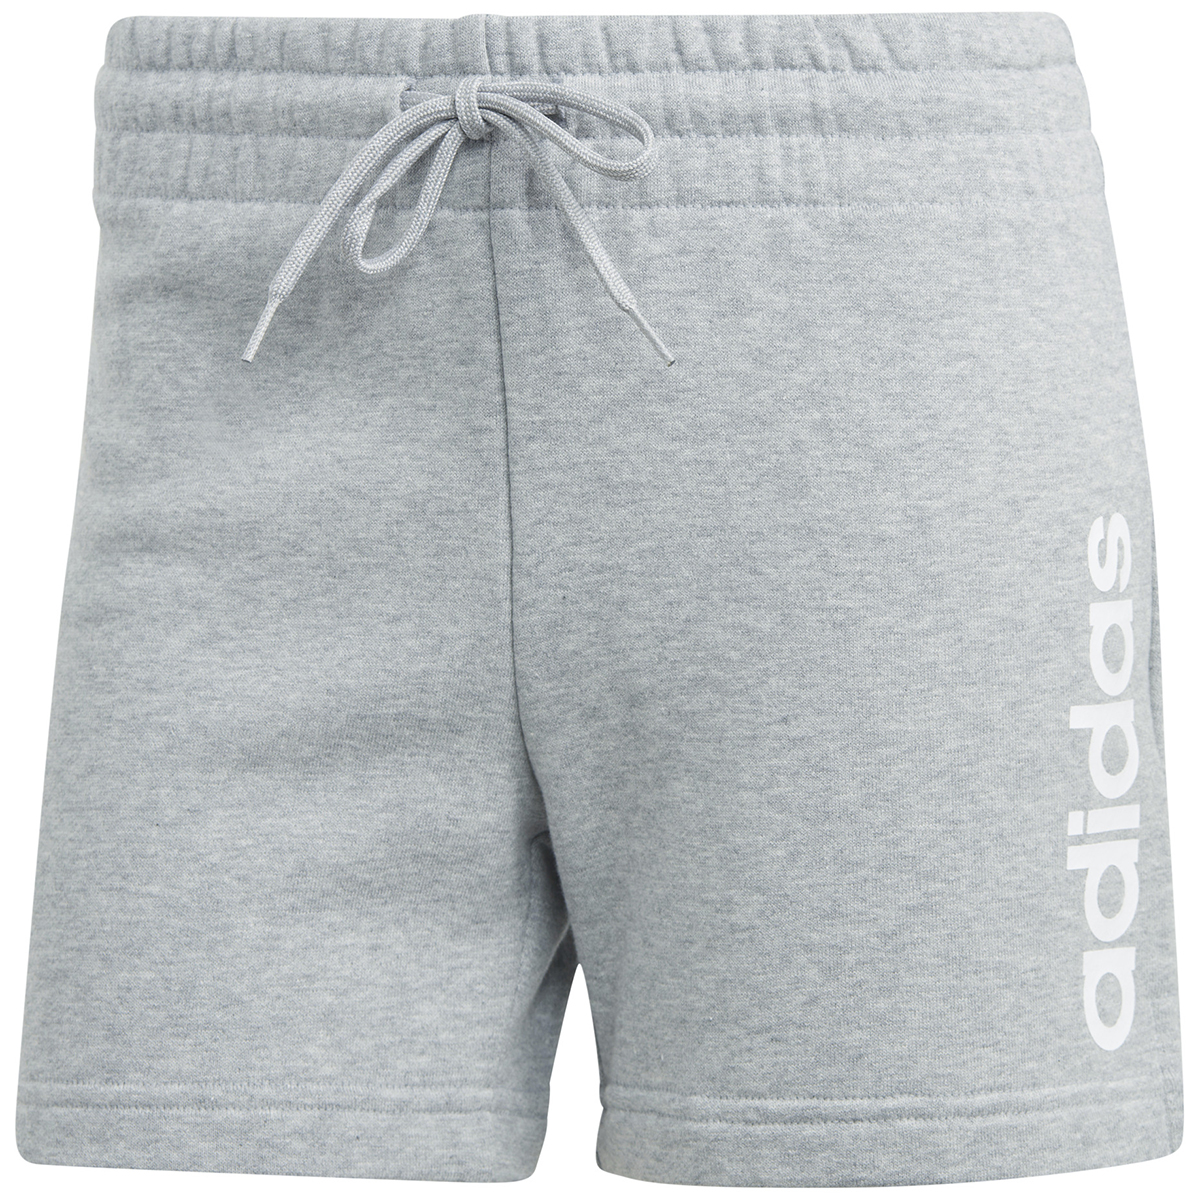 Adidas Women's Essentials French Terry Shorts